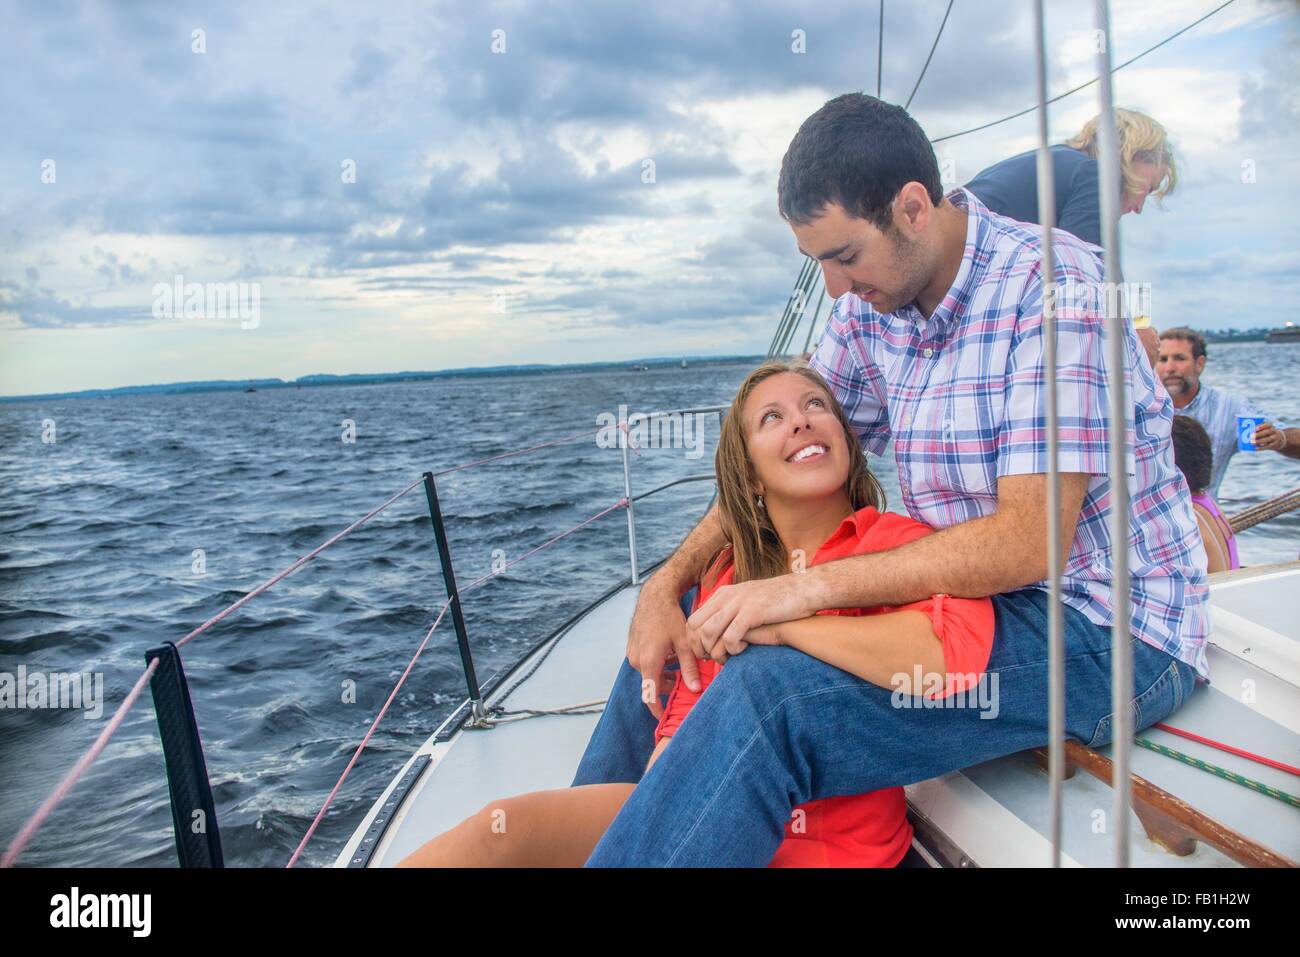 Young woman sitting between young mans legs on sailboat, face to face smiling Stock Photo